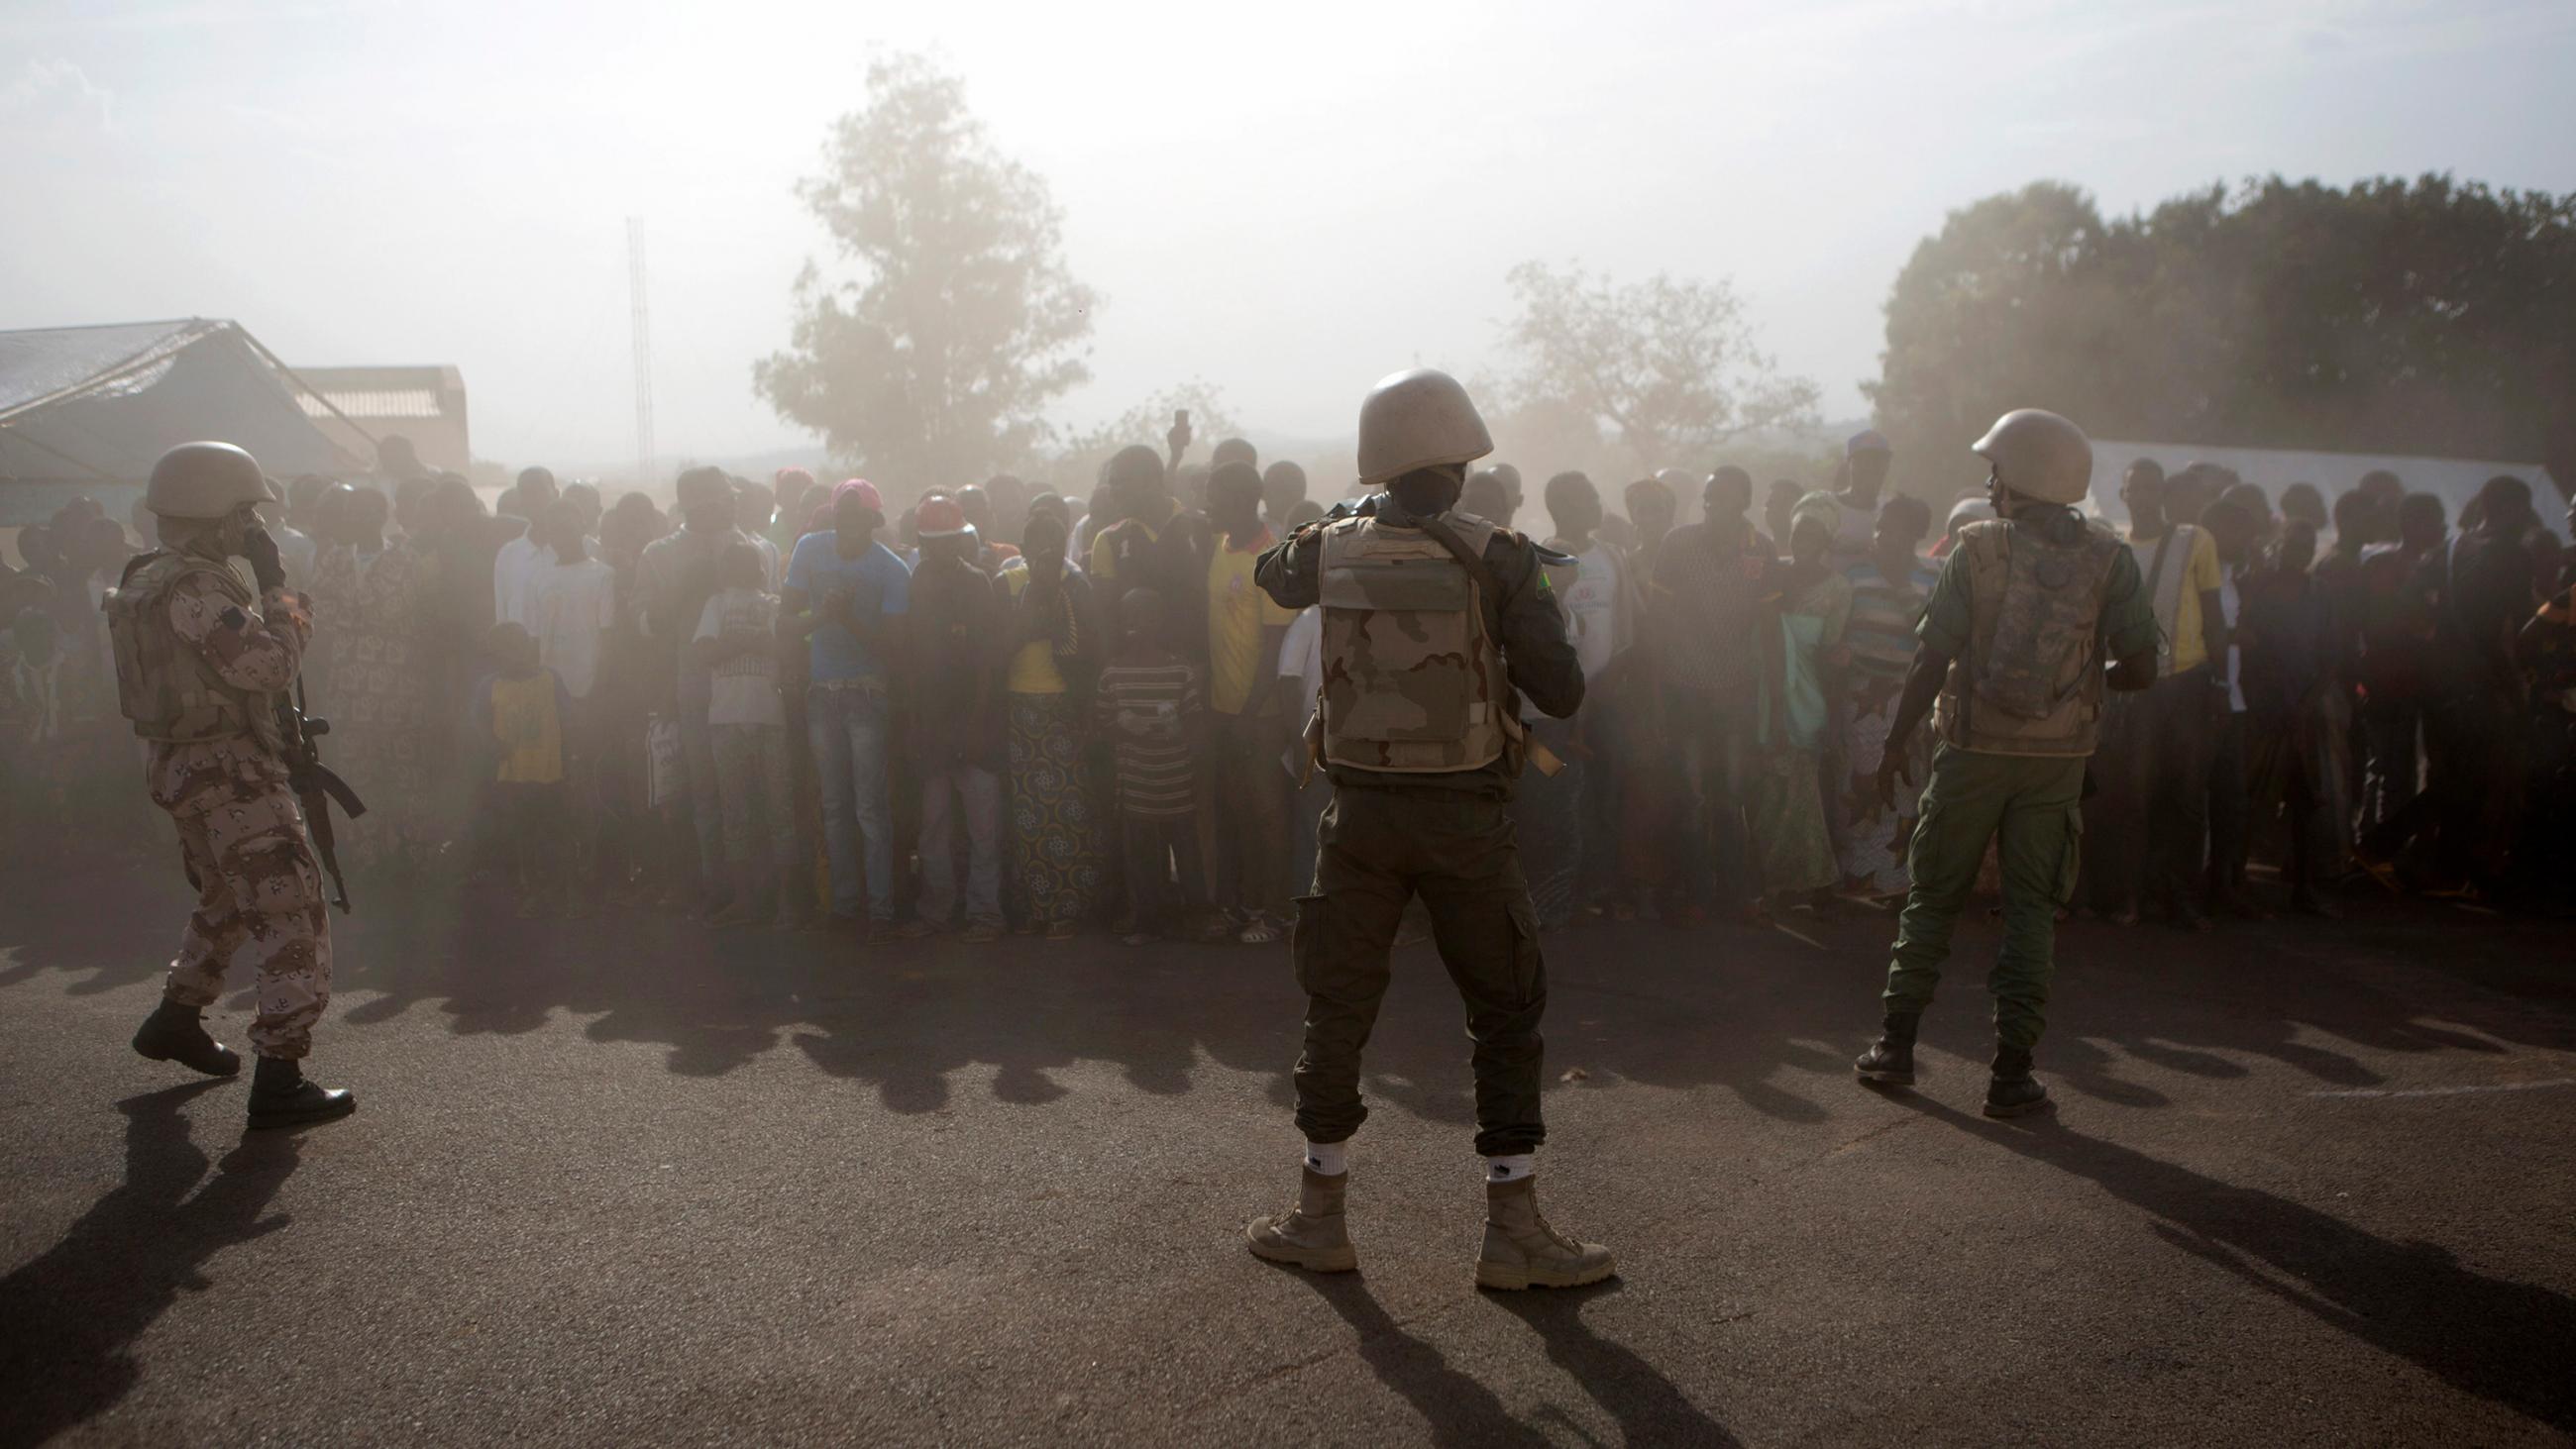 he picture shows a large crowd shrouded in what appears to be early morning mist with a thin line of heavily armed soldiers wearing combat fatigues standing between them and the camera. 